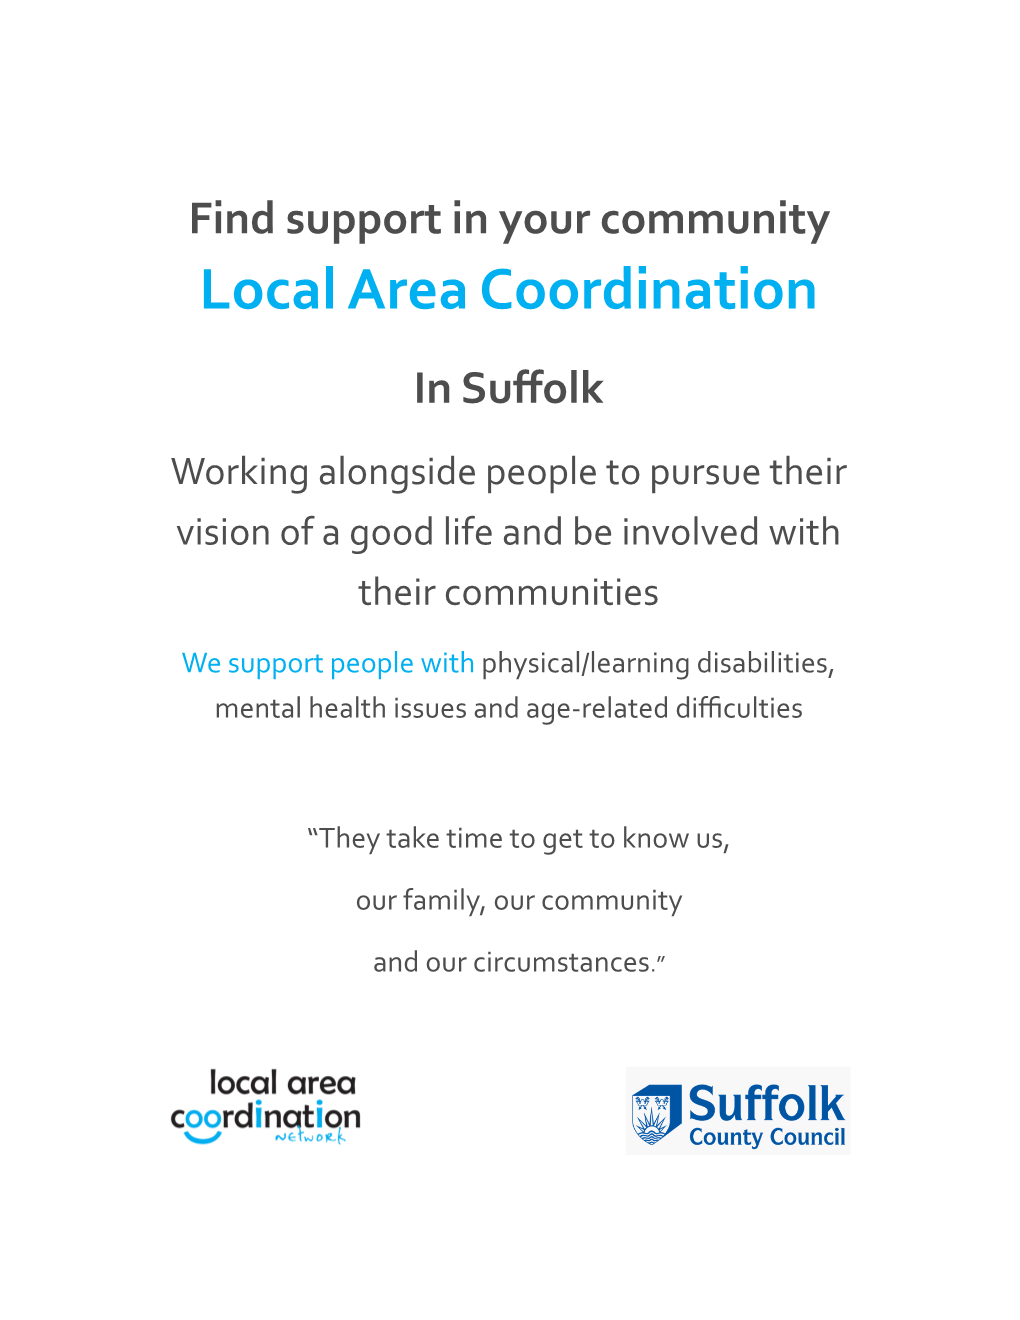 Local Area Coordination in Suffolk Working Alongside People to Pursue Their Vision of a Good Life and Be Involved With